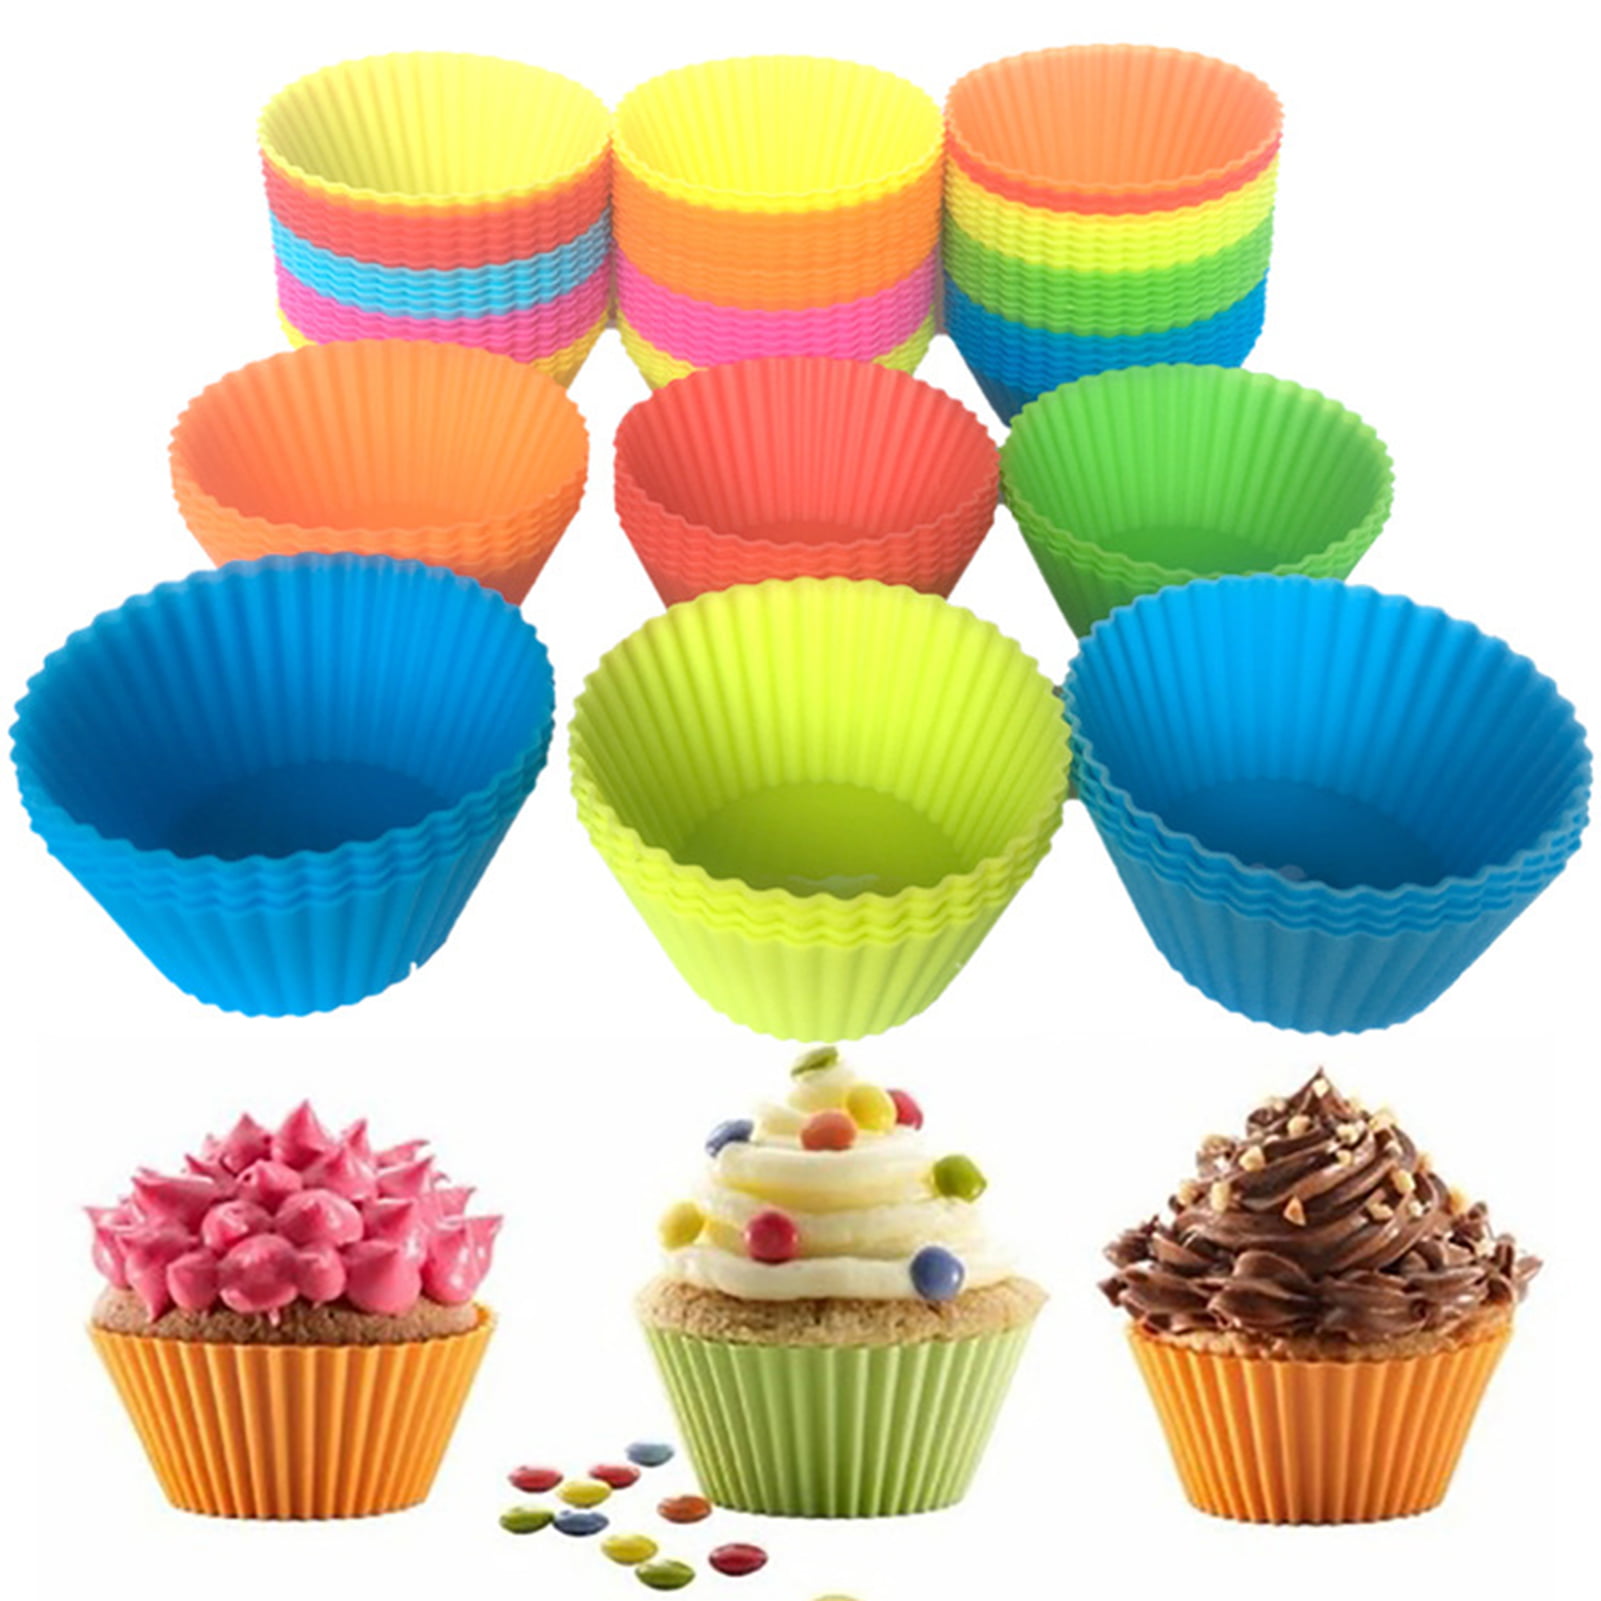 Details about   Silicone Baking Cups Reusable Muffin Dessert Cookie Cupcake Liner Molds 